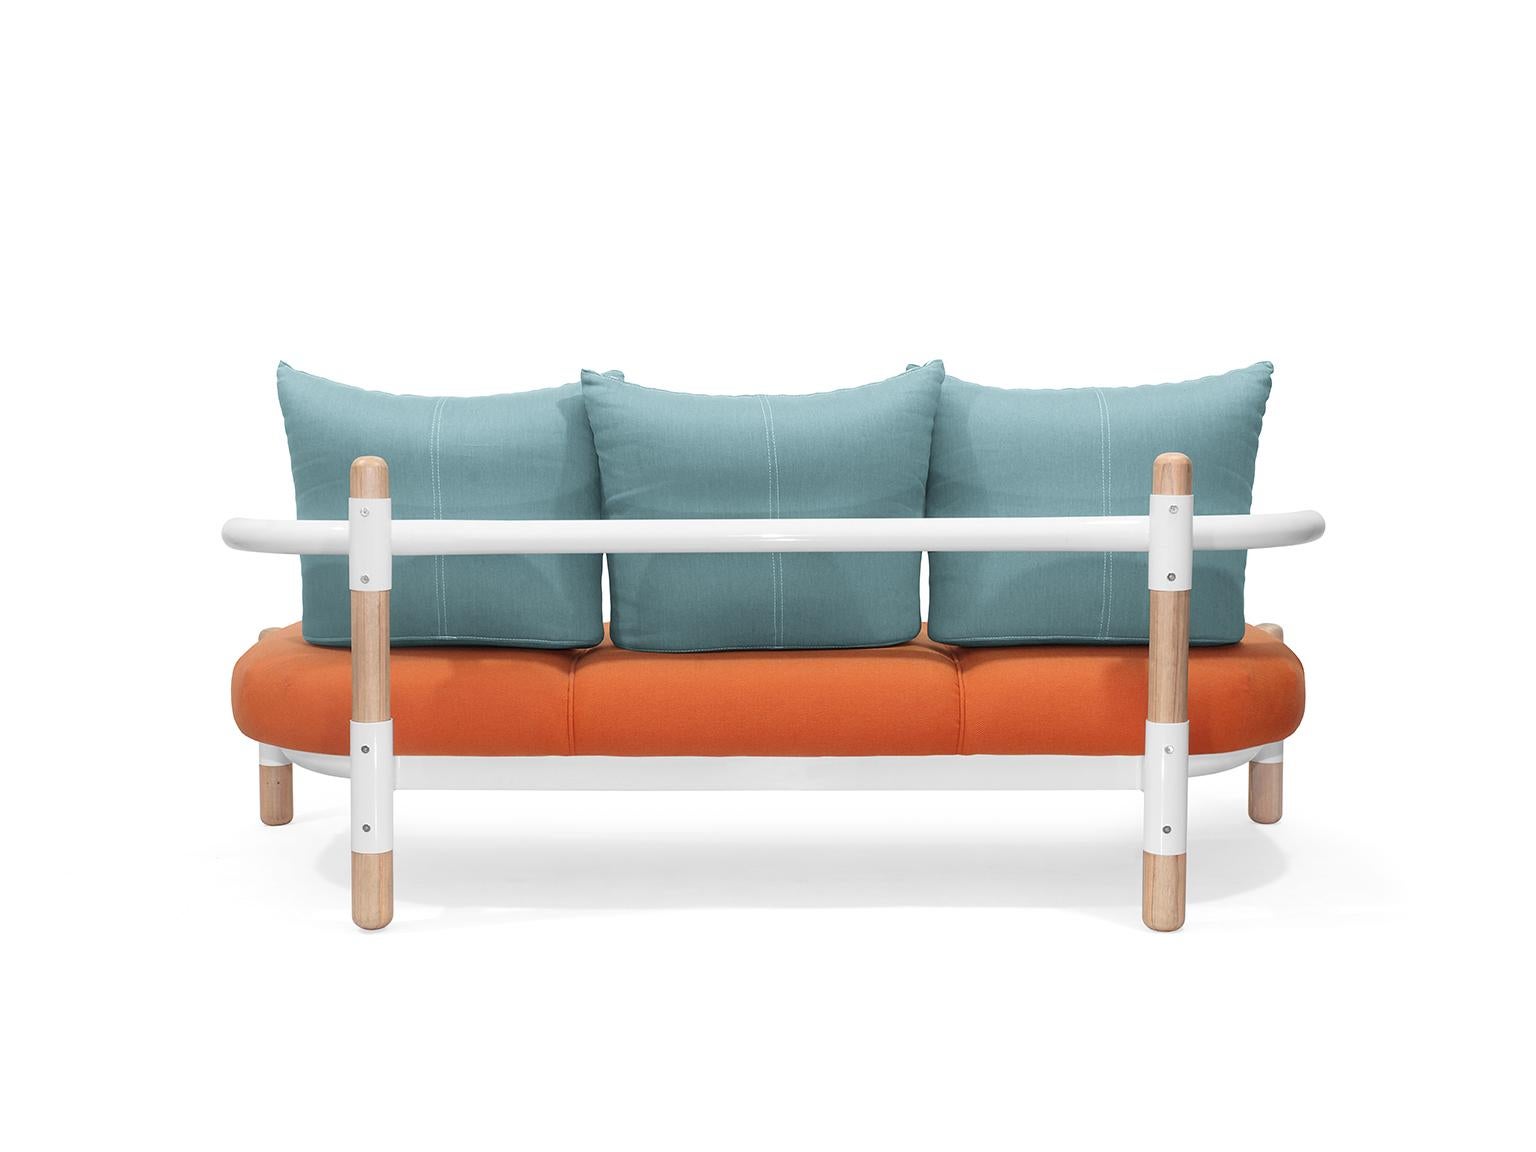 Brazilian Tomato PK15 Three-Seat Sofa, Carbon Steel Structure & Wood Legs by Paulo Kobylka For Sale